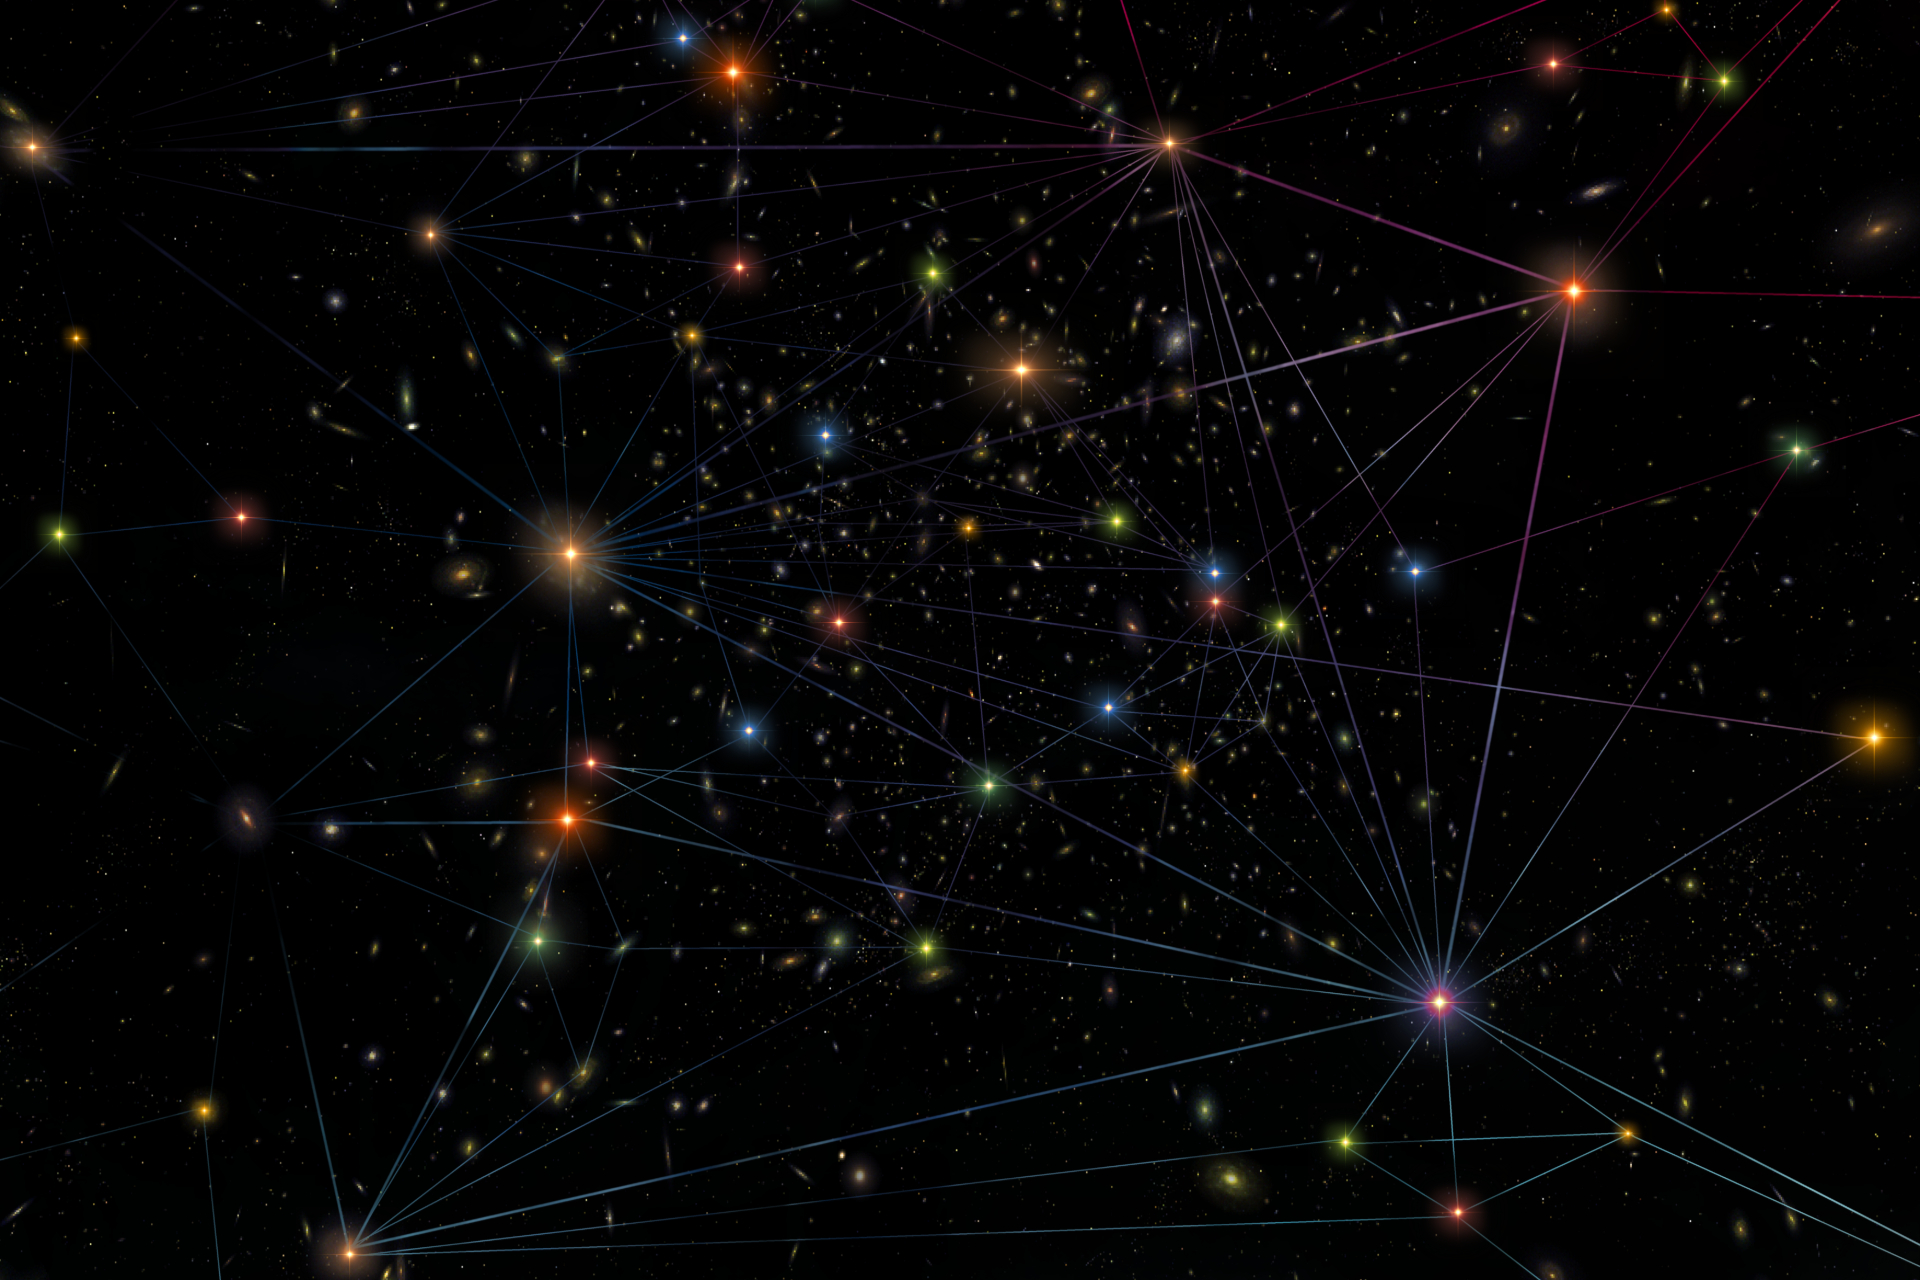 a map showing lines between a map of galaxies, shown as colored points across a dark sky